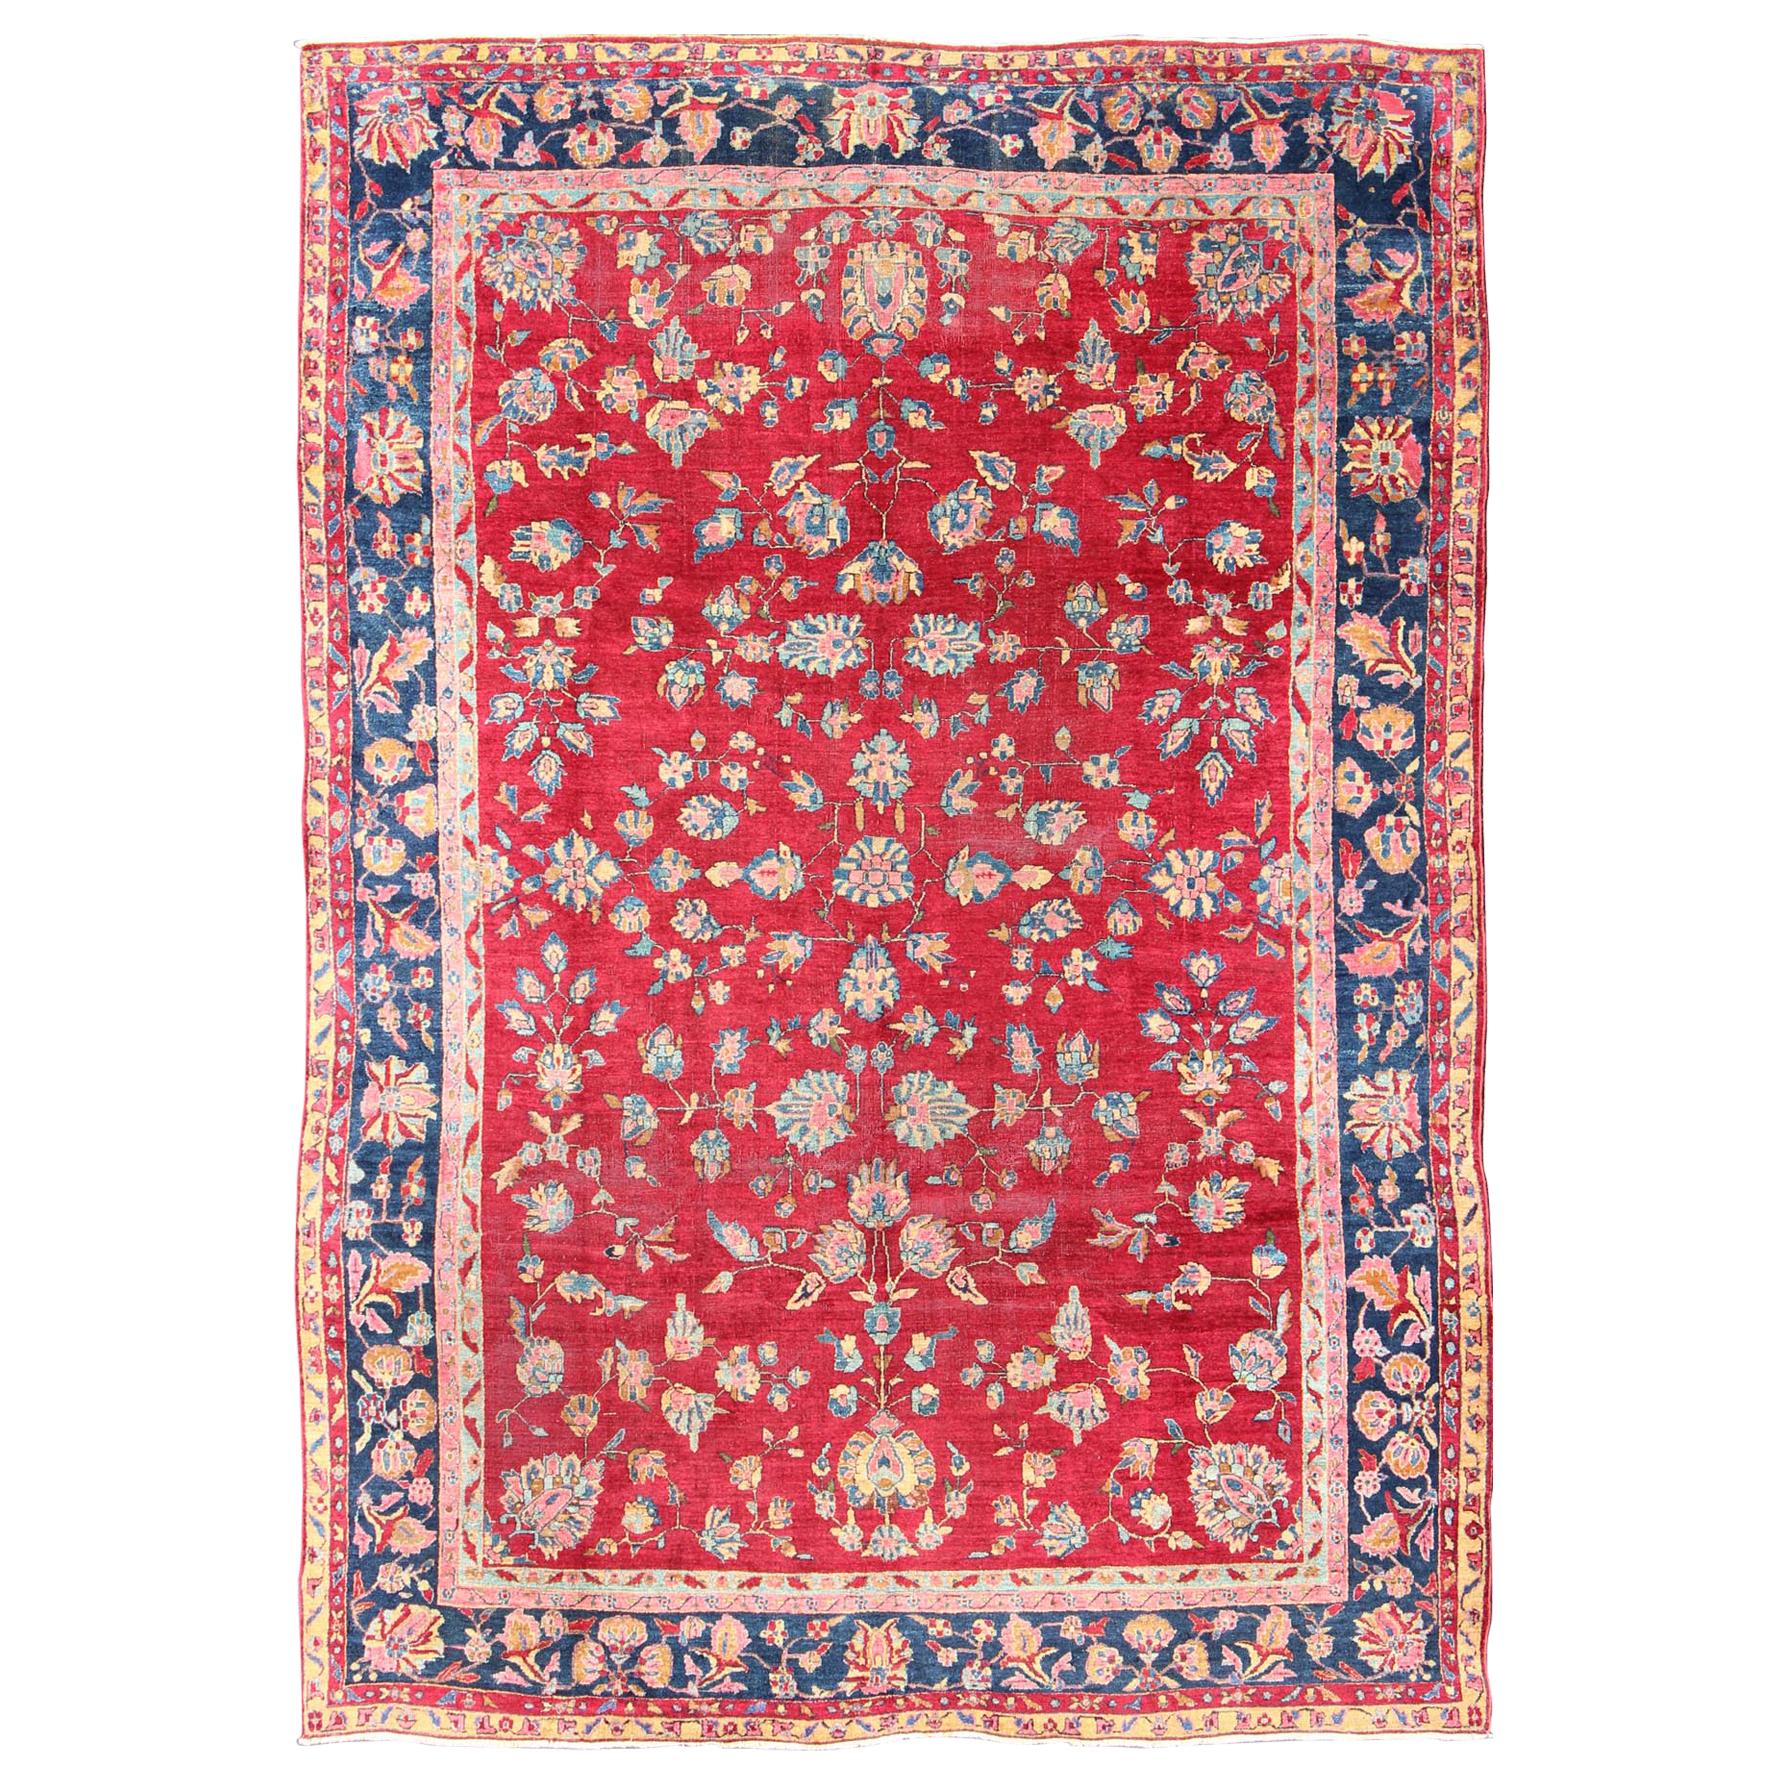 All-Over Floral Design Antique Indian Amritsar Rug in Red and Blue Tones